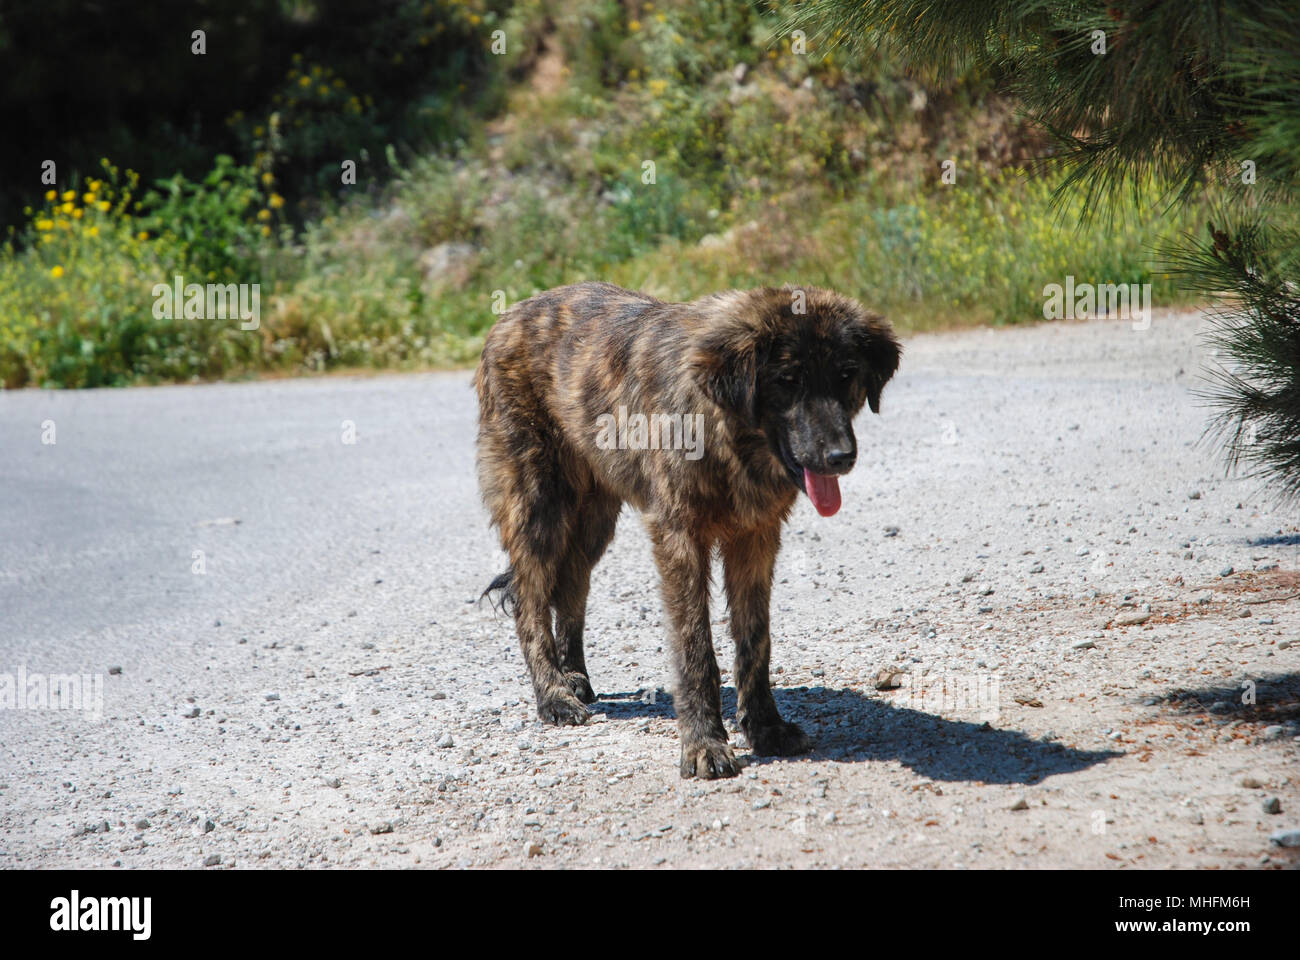 Wild dog wandering alone on the road. Stock Photo